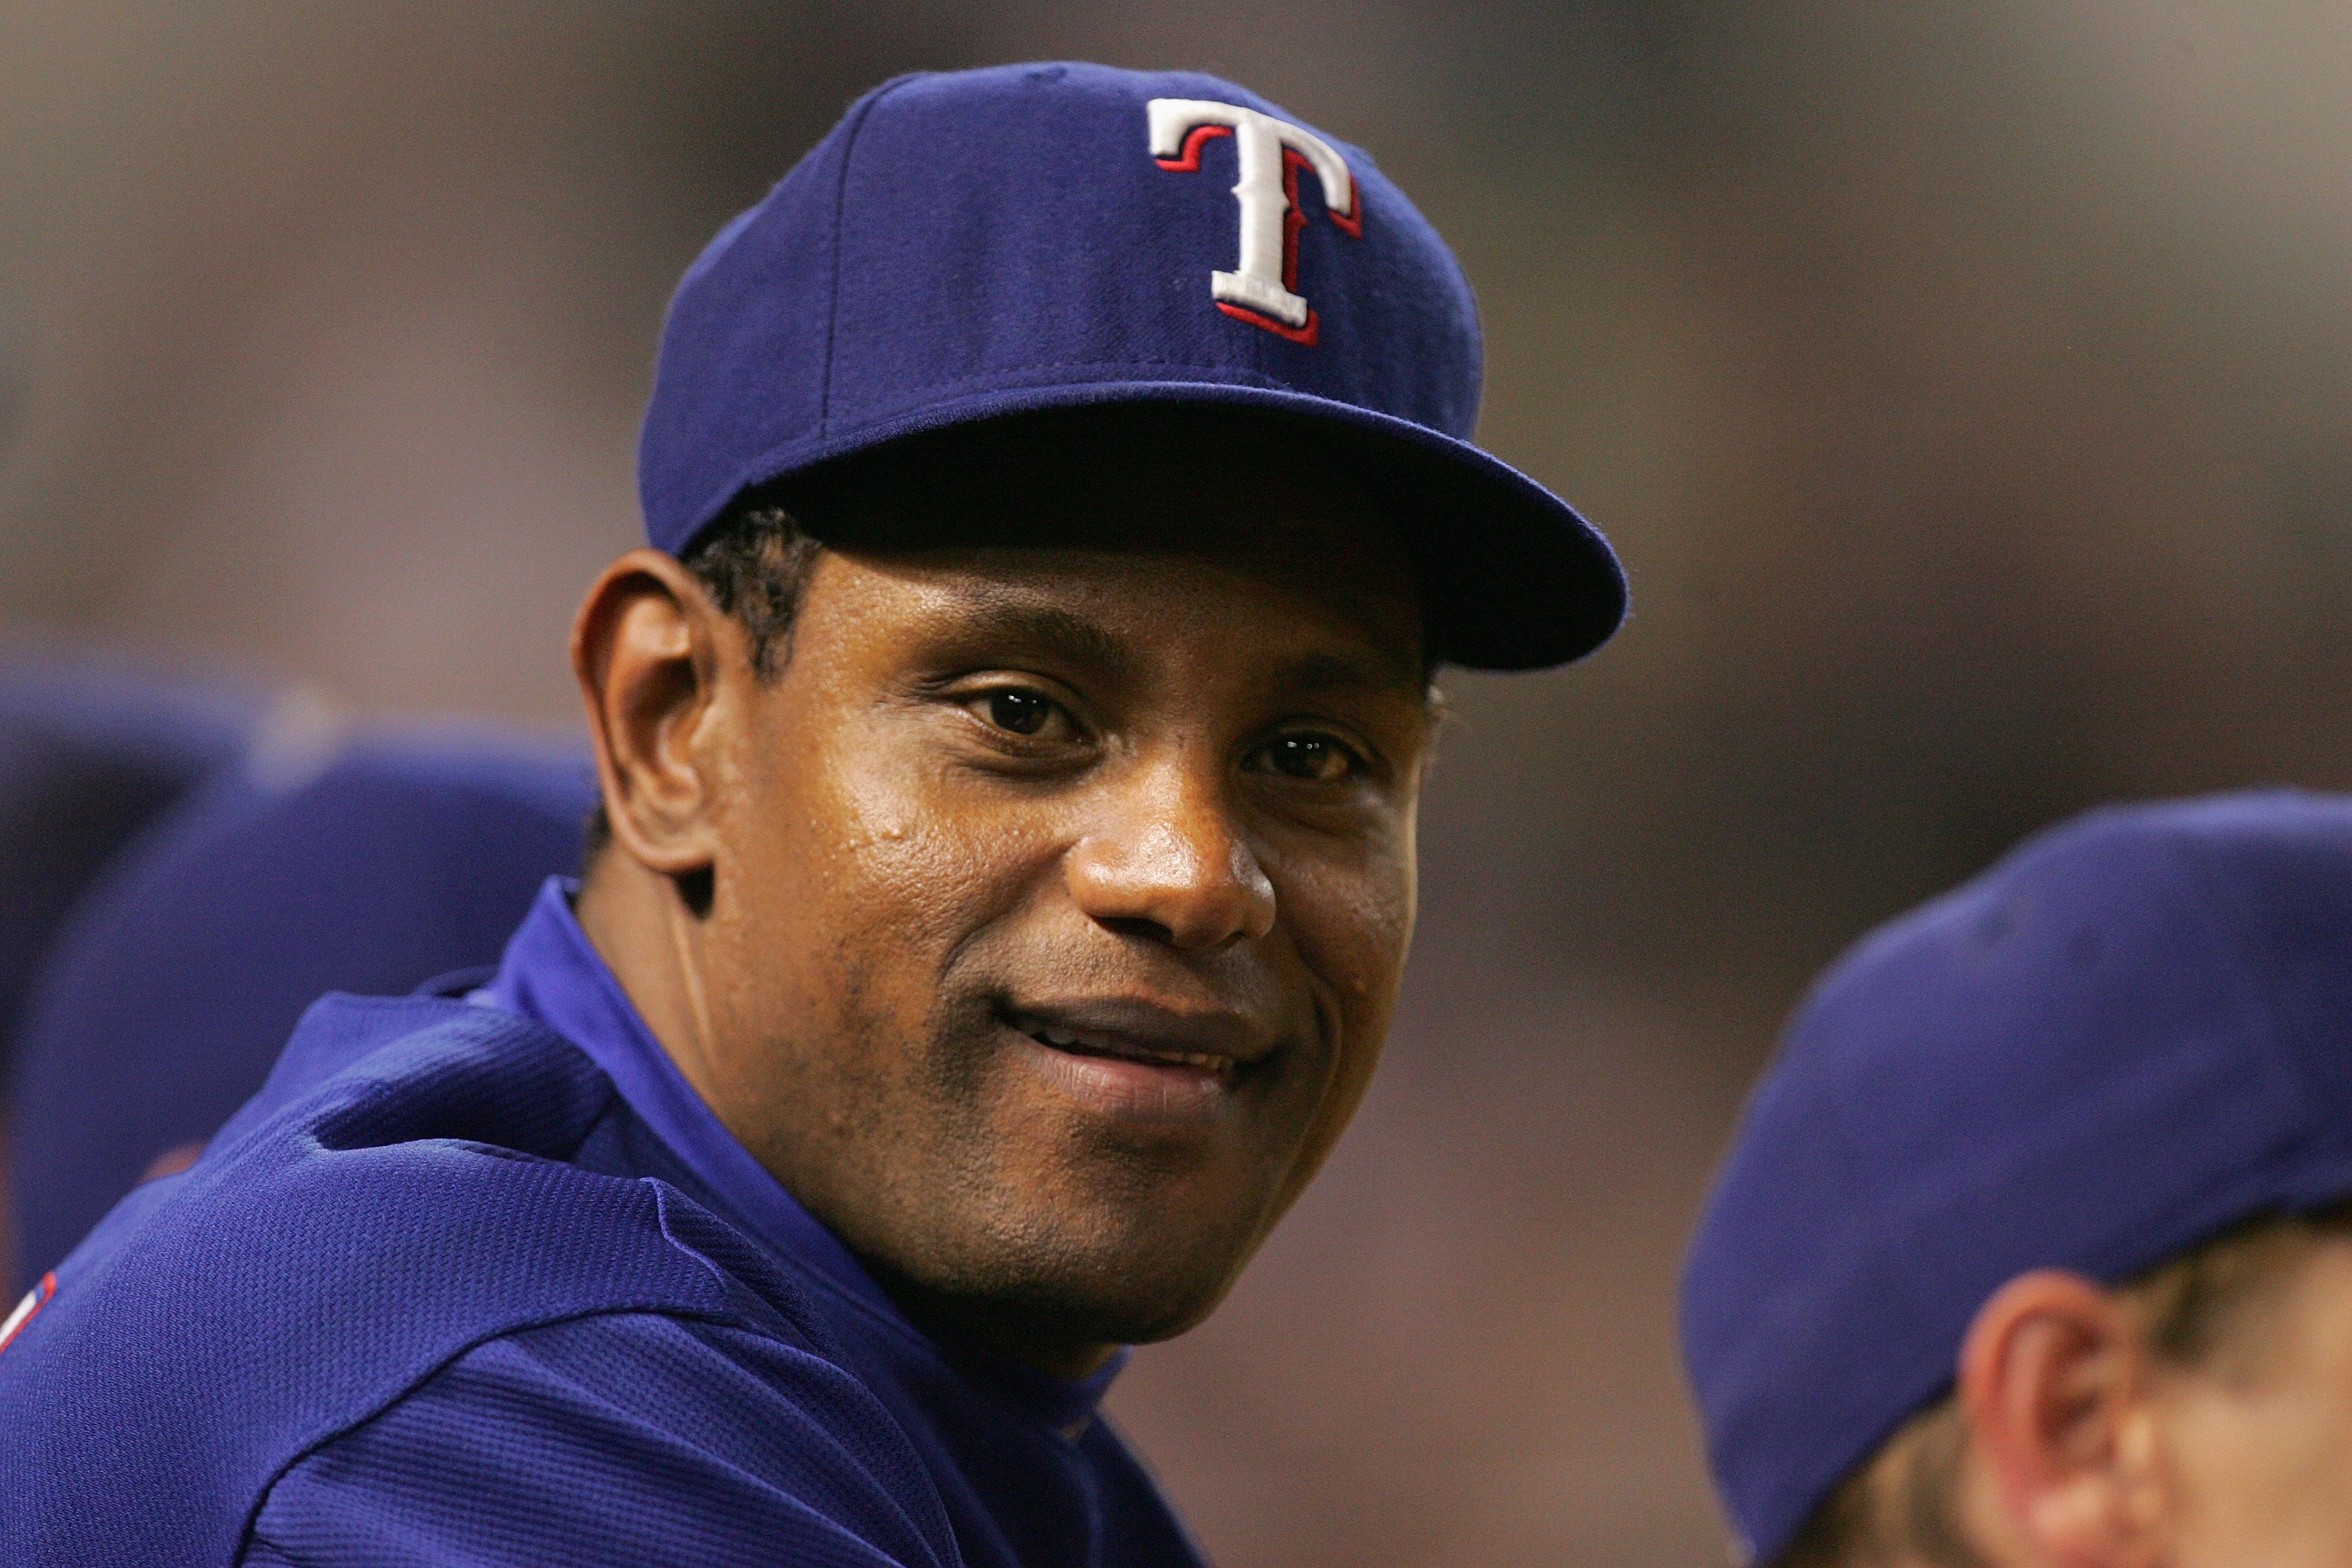 Steroids, Sammy Sosa, and the Hall of Fame, by Sam Ostrowski, RO Baseball